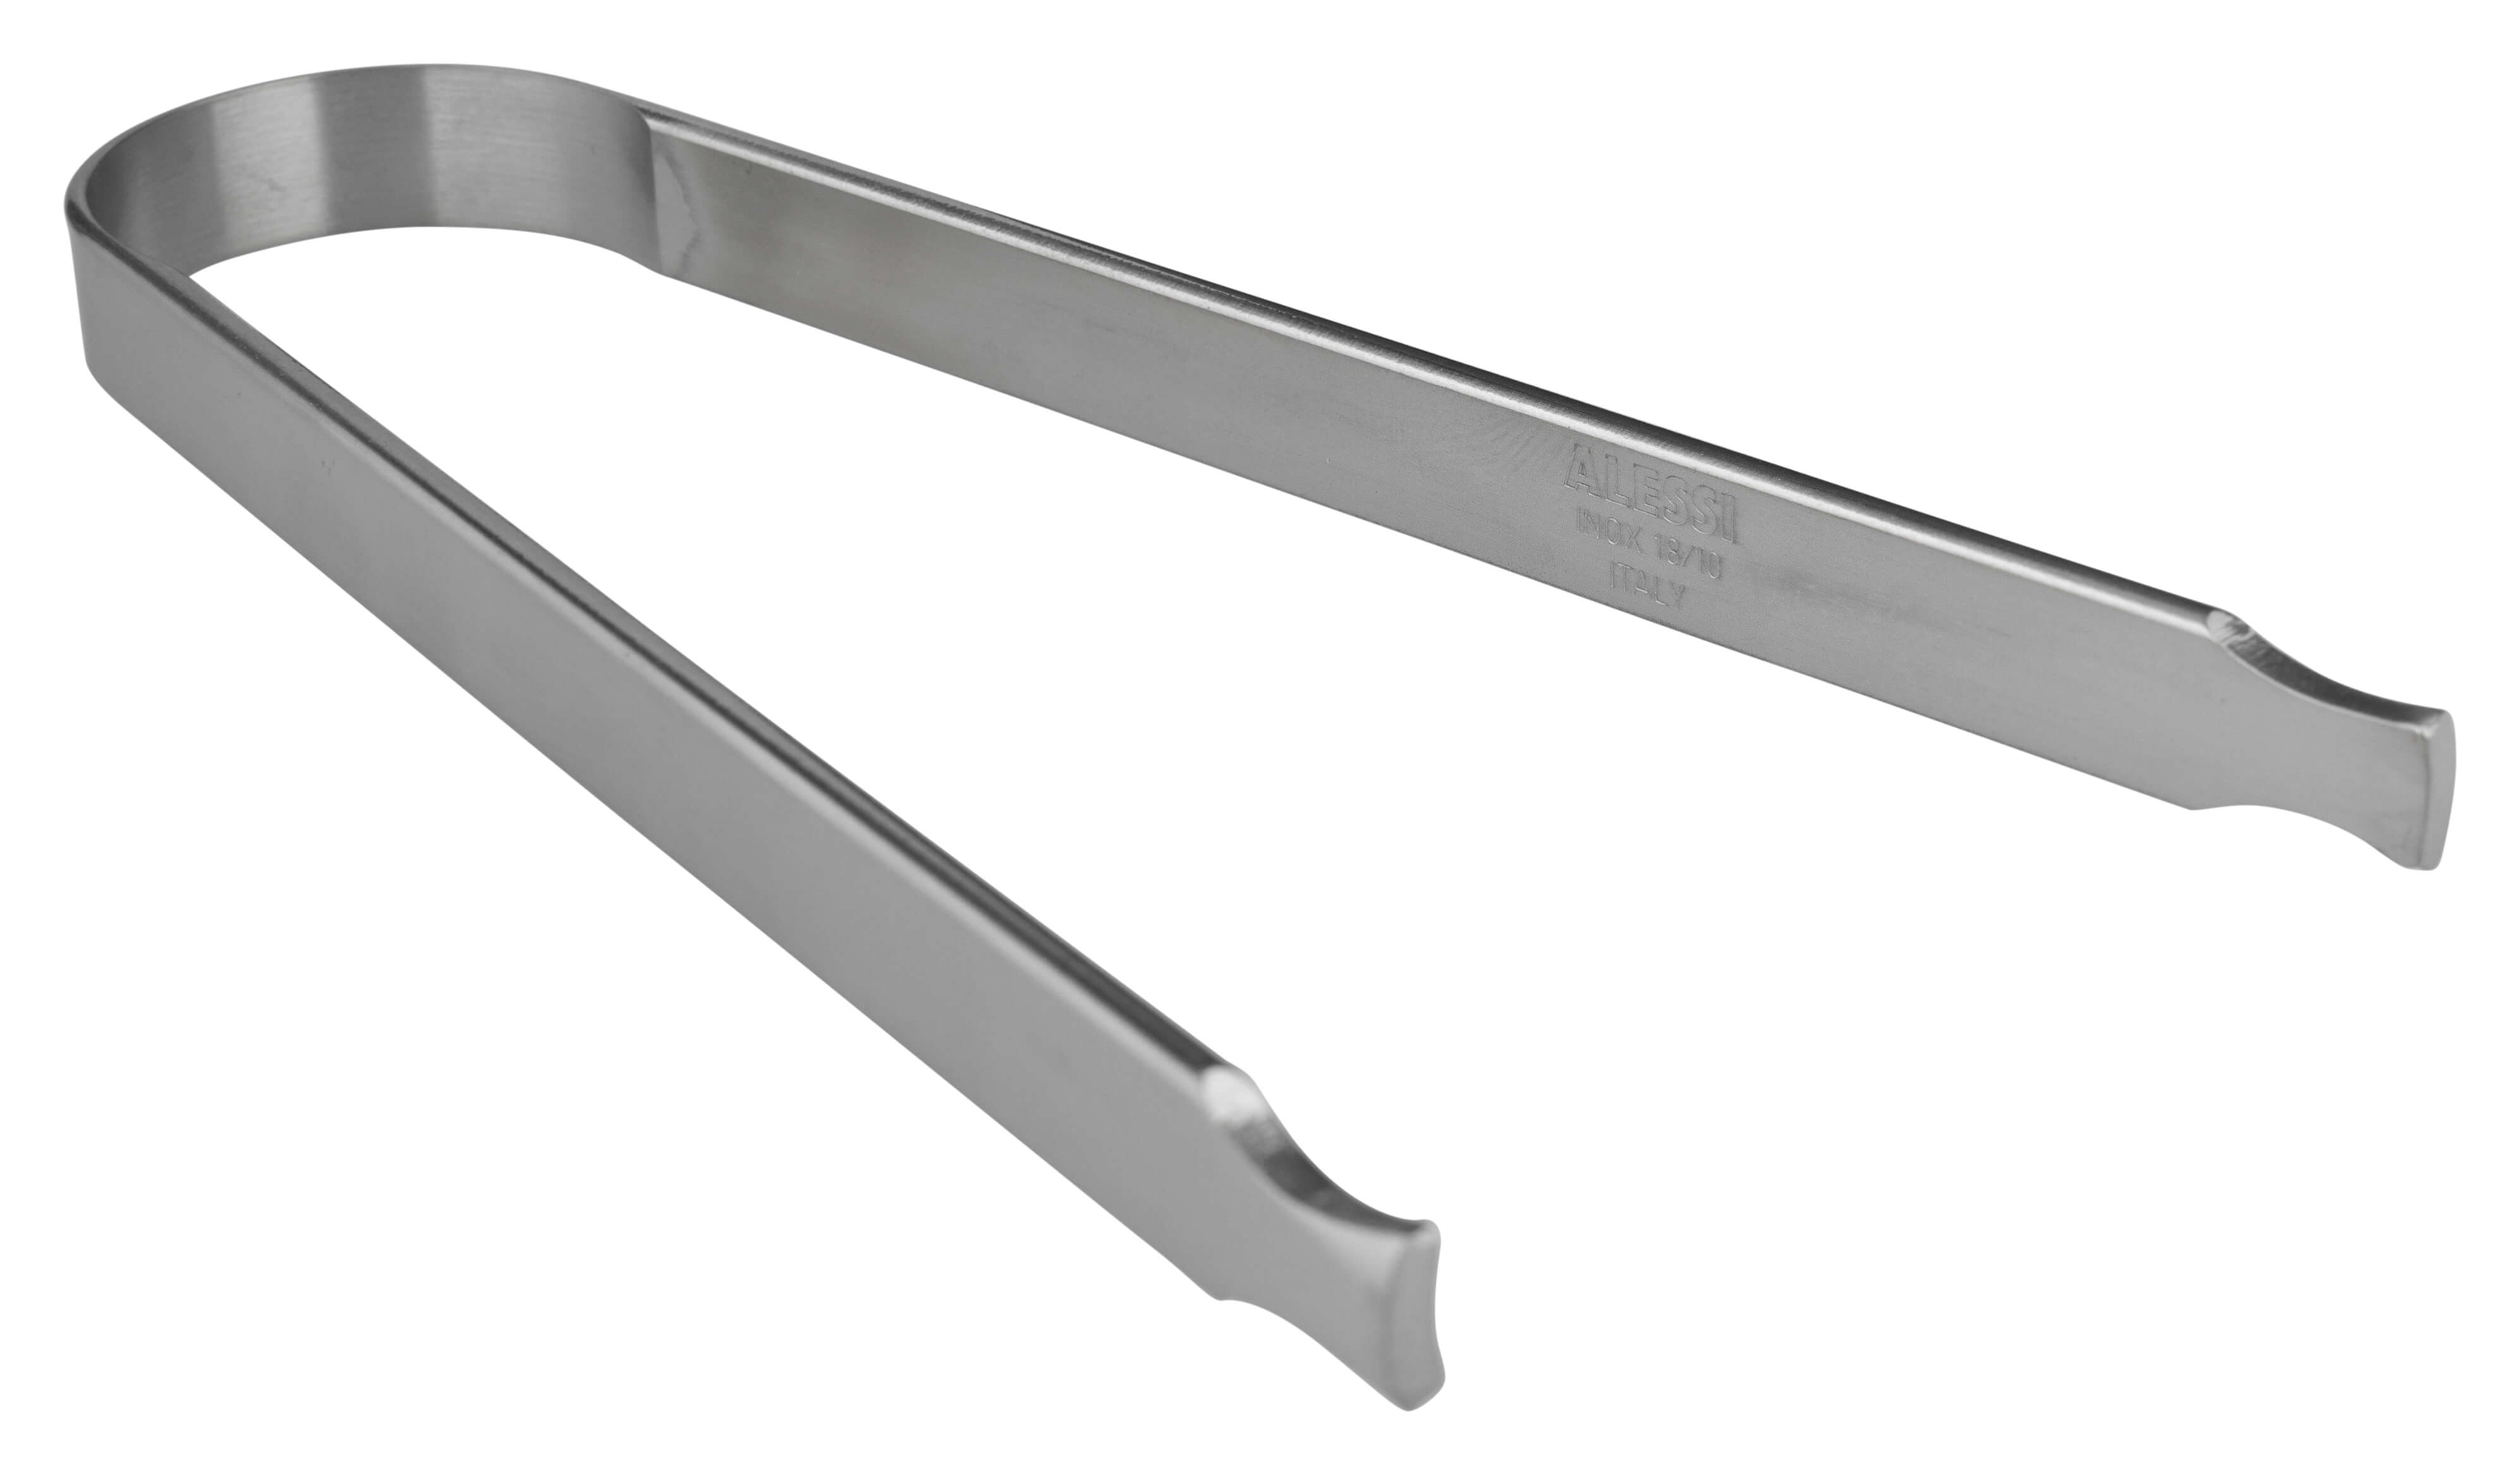 Ice tongs "507", Alessi - stainless steel (16cm)